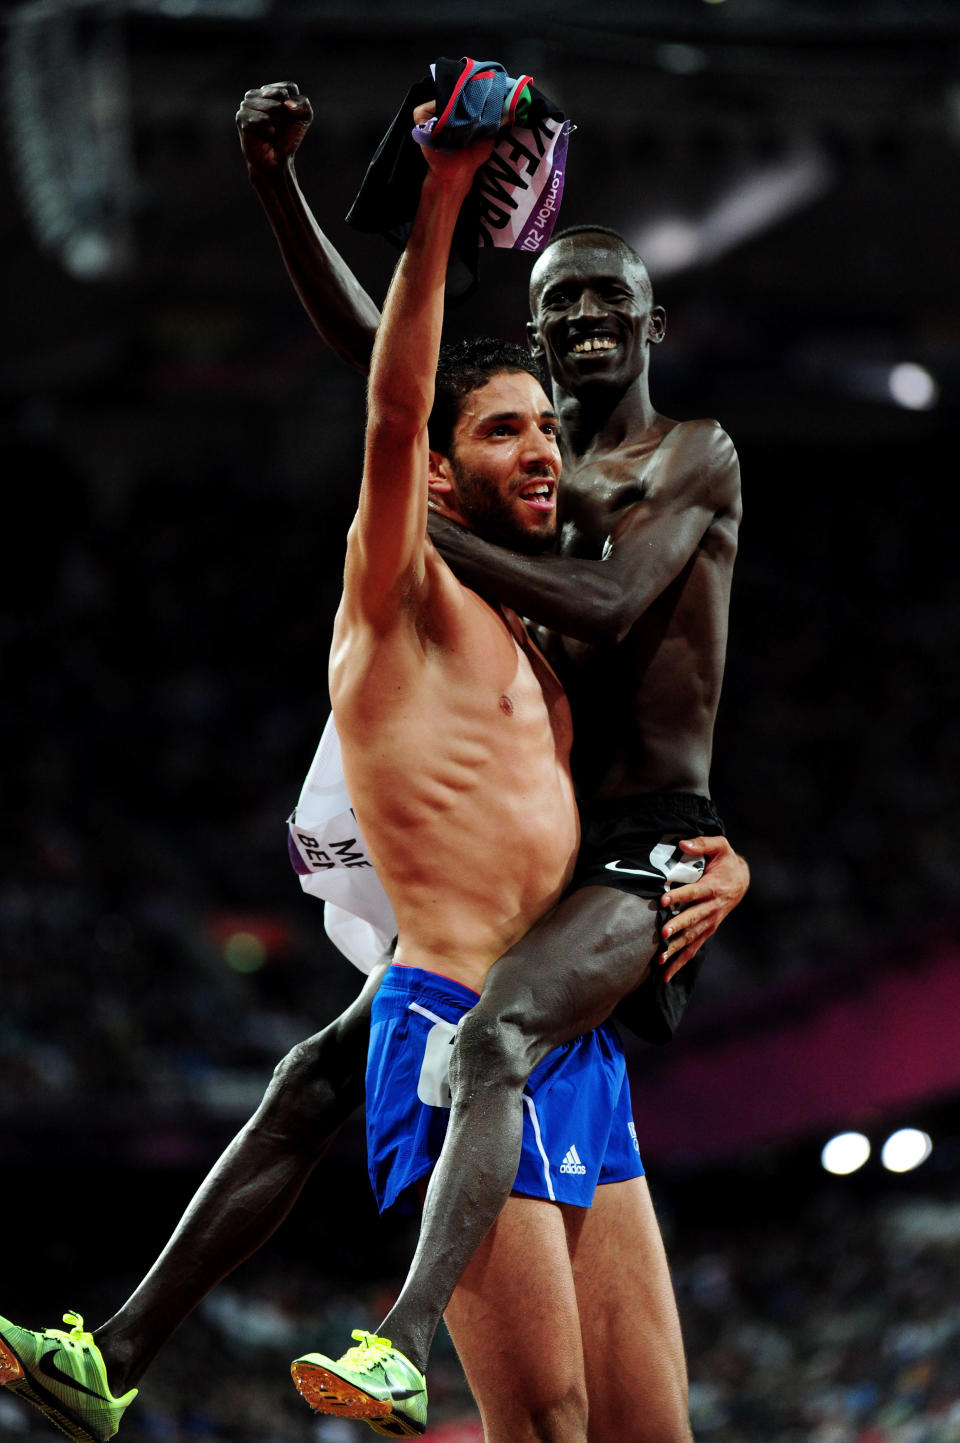 LONDON, ENGLAND - AUGUST 05: Silver medalist Mahiedine Mekhissi-Benabbad of France celebrates with gold medalist Ezekiel Kemboi of Kenya celebrate after the Men's 3000m Steeplechase on Day 9 of the London 2012 Olympic Games at the Olympic Stadium on August 5, 2012 in London, England. (Photo by Stu Forster/Getty Images)